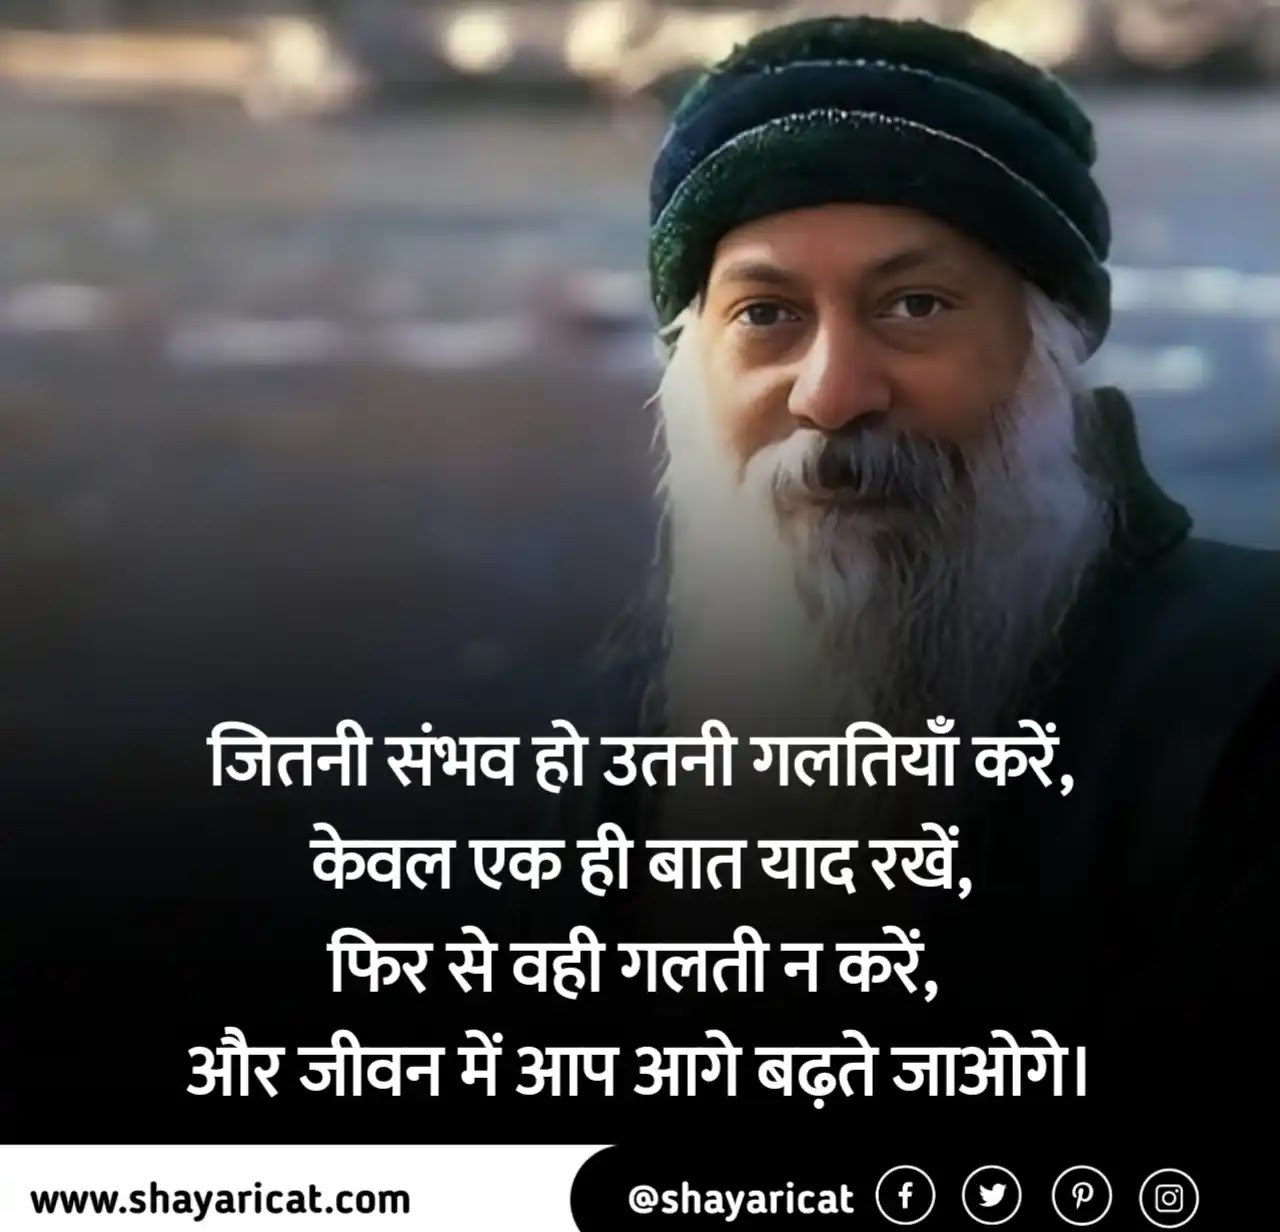 60+] Osho Quotes in Hindi | ओशो के अनमोल विचार